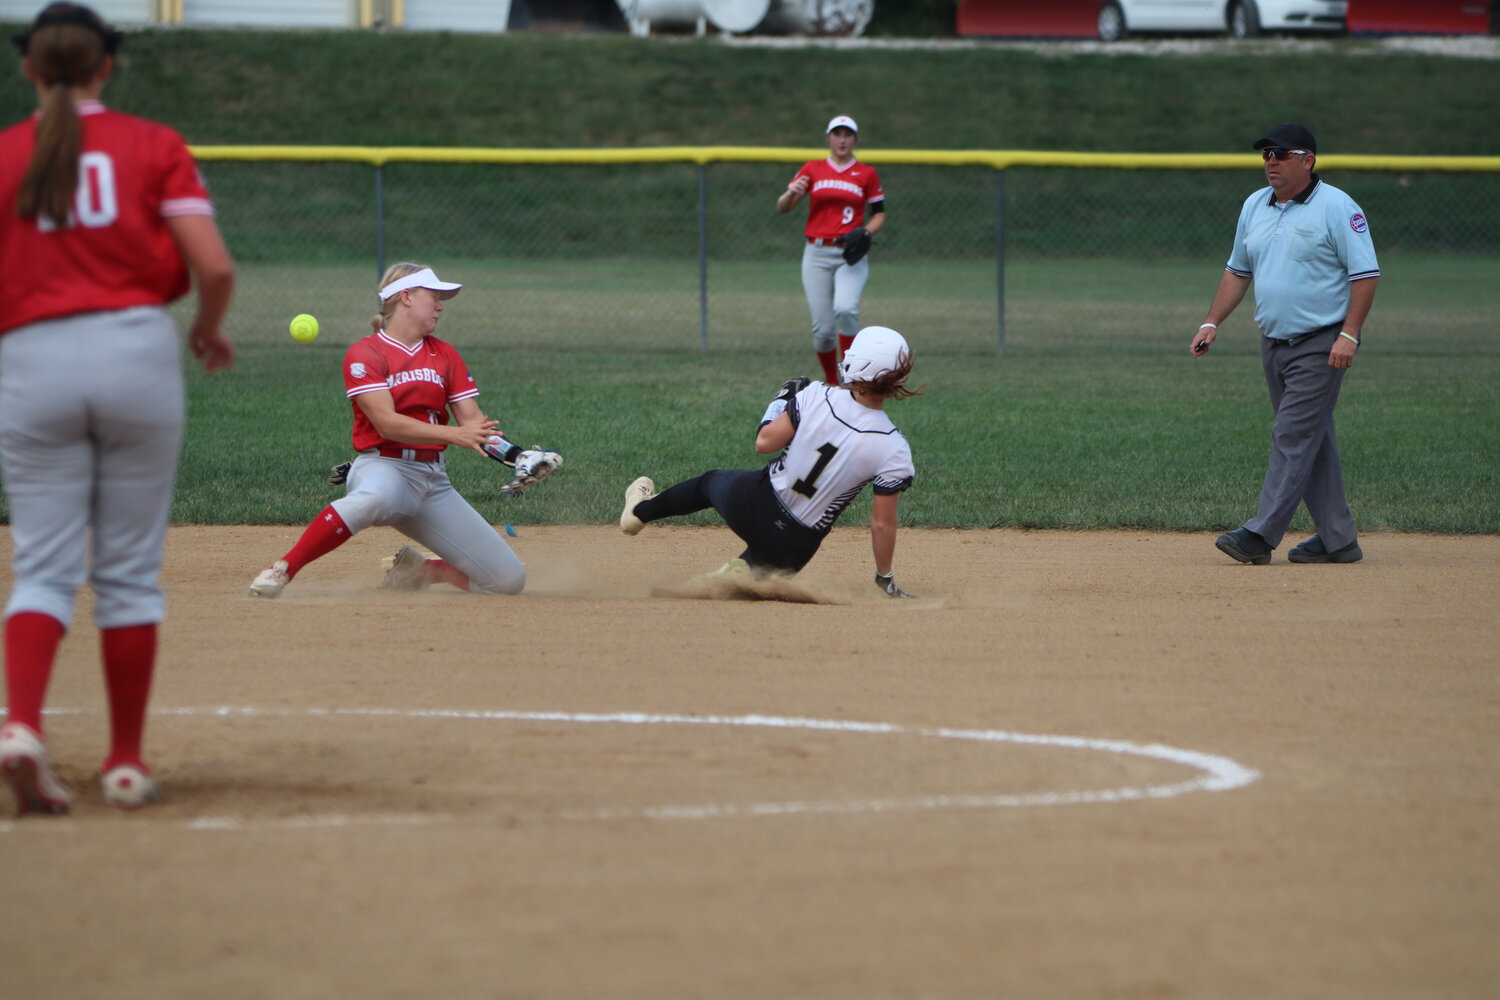 Addison Powell slides into second.